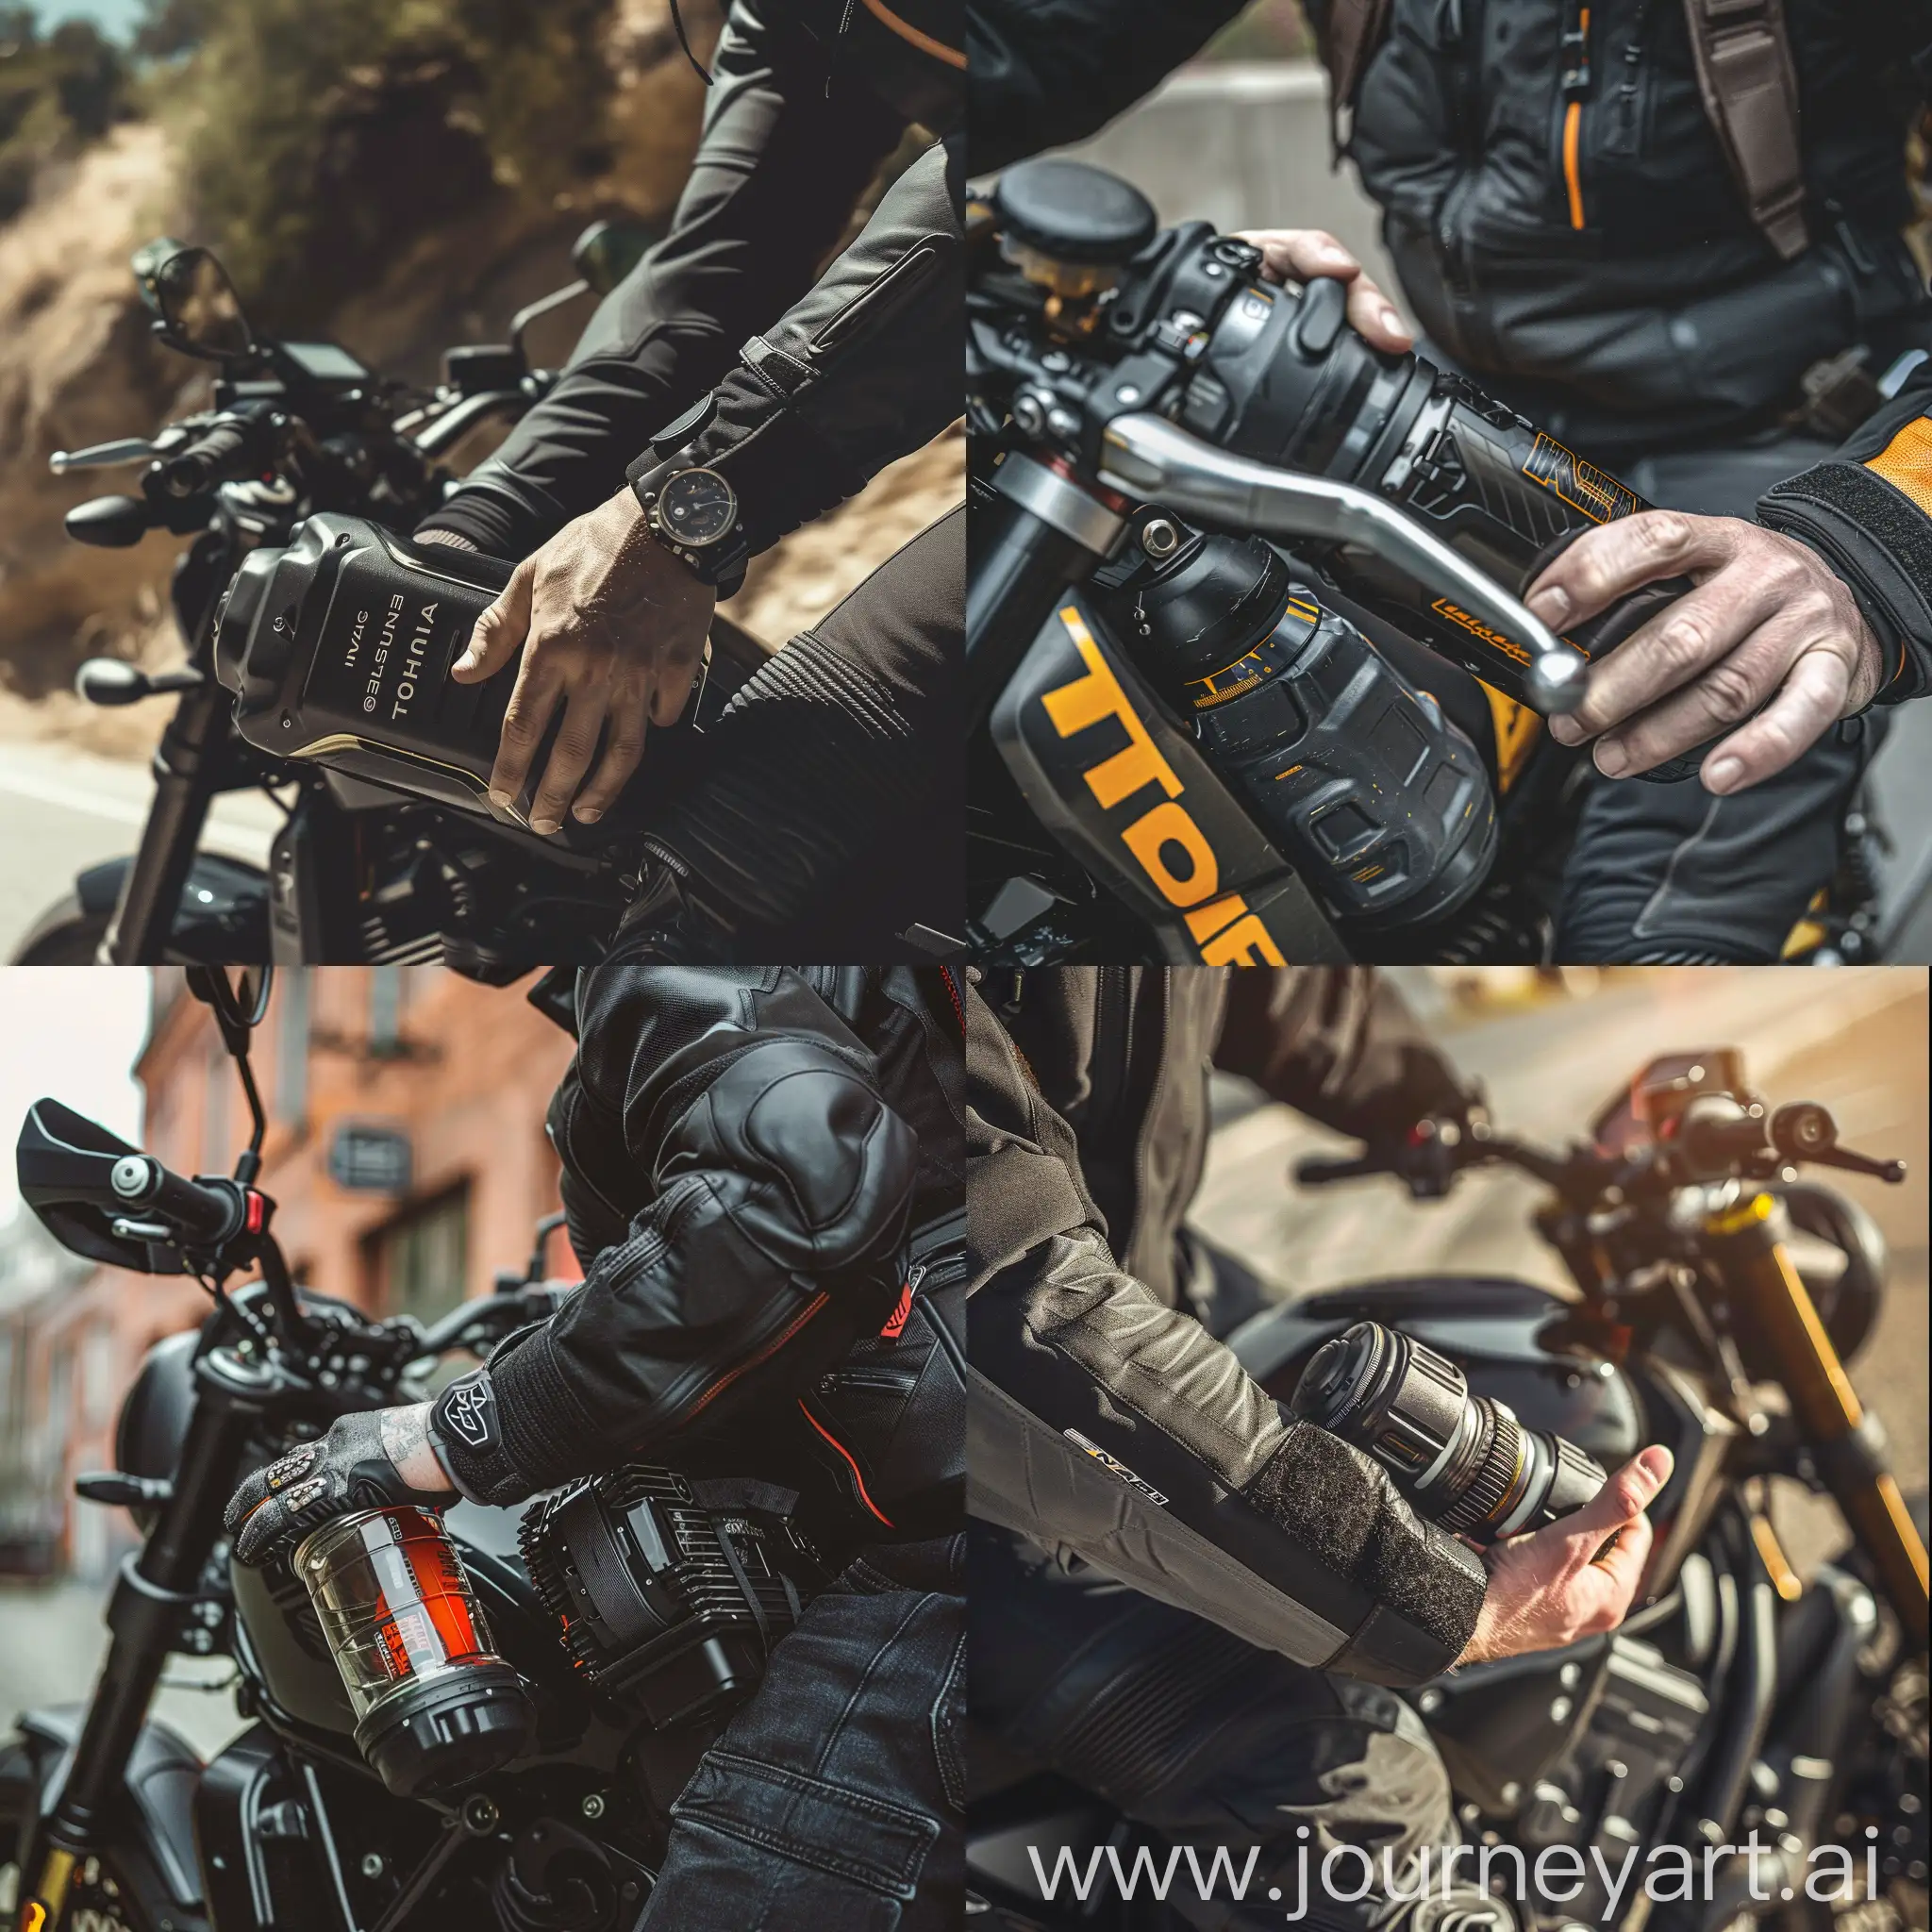 Motorcycle-Rider-Displaying-Energy-Canister-CloseUp